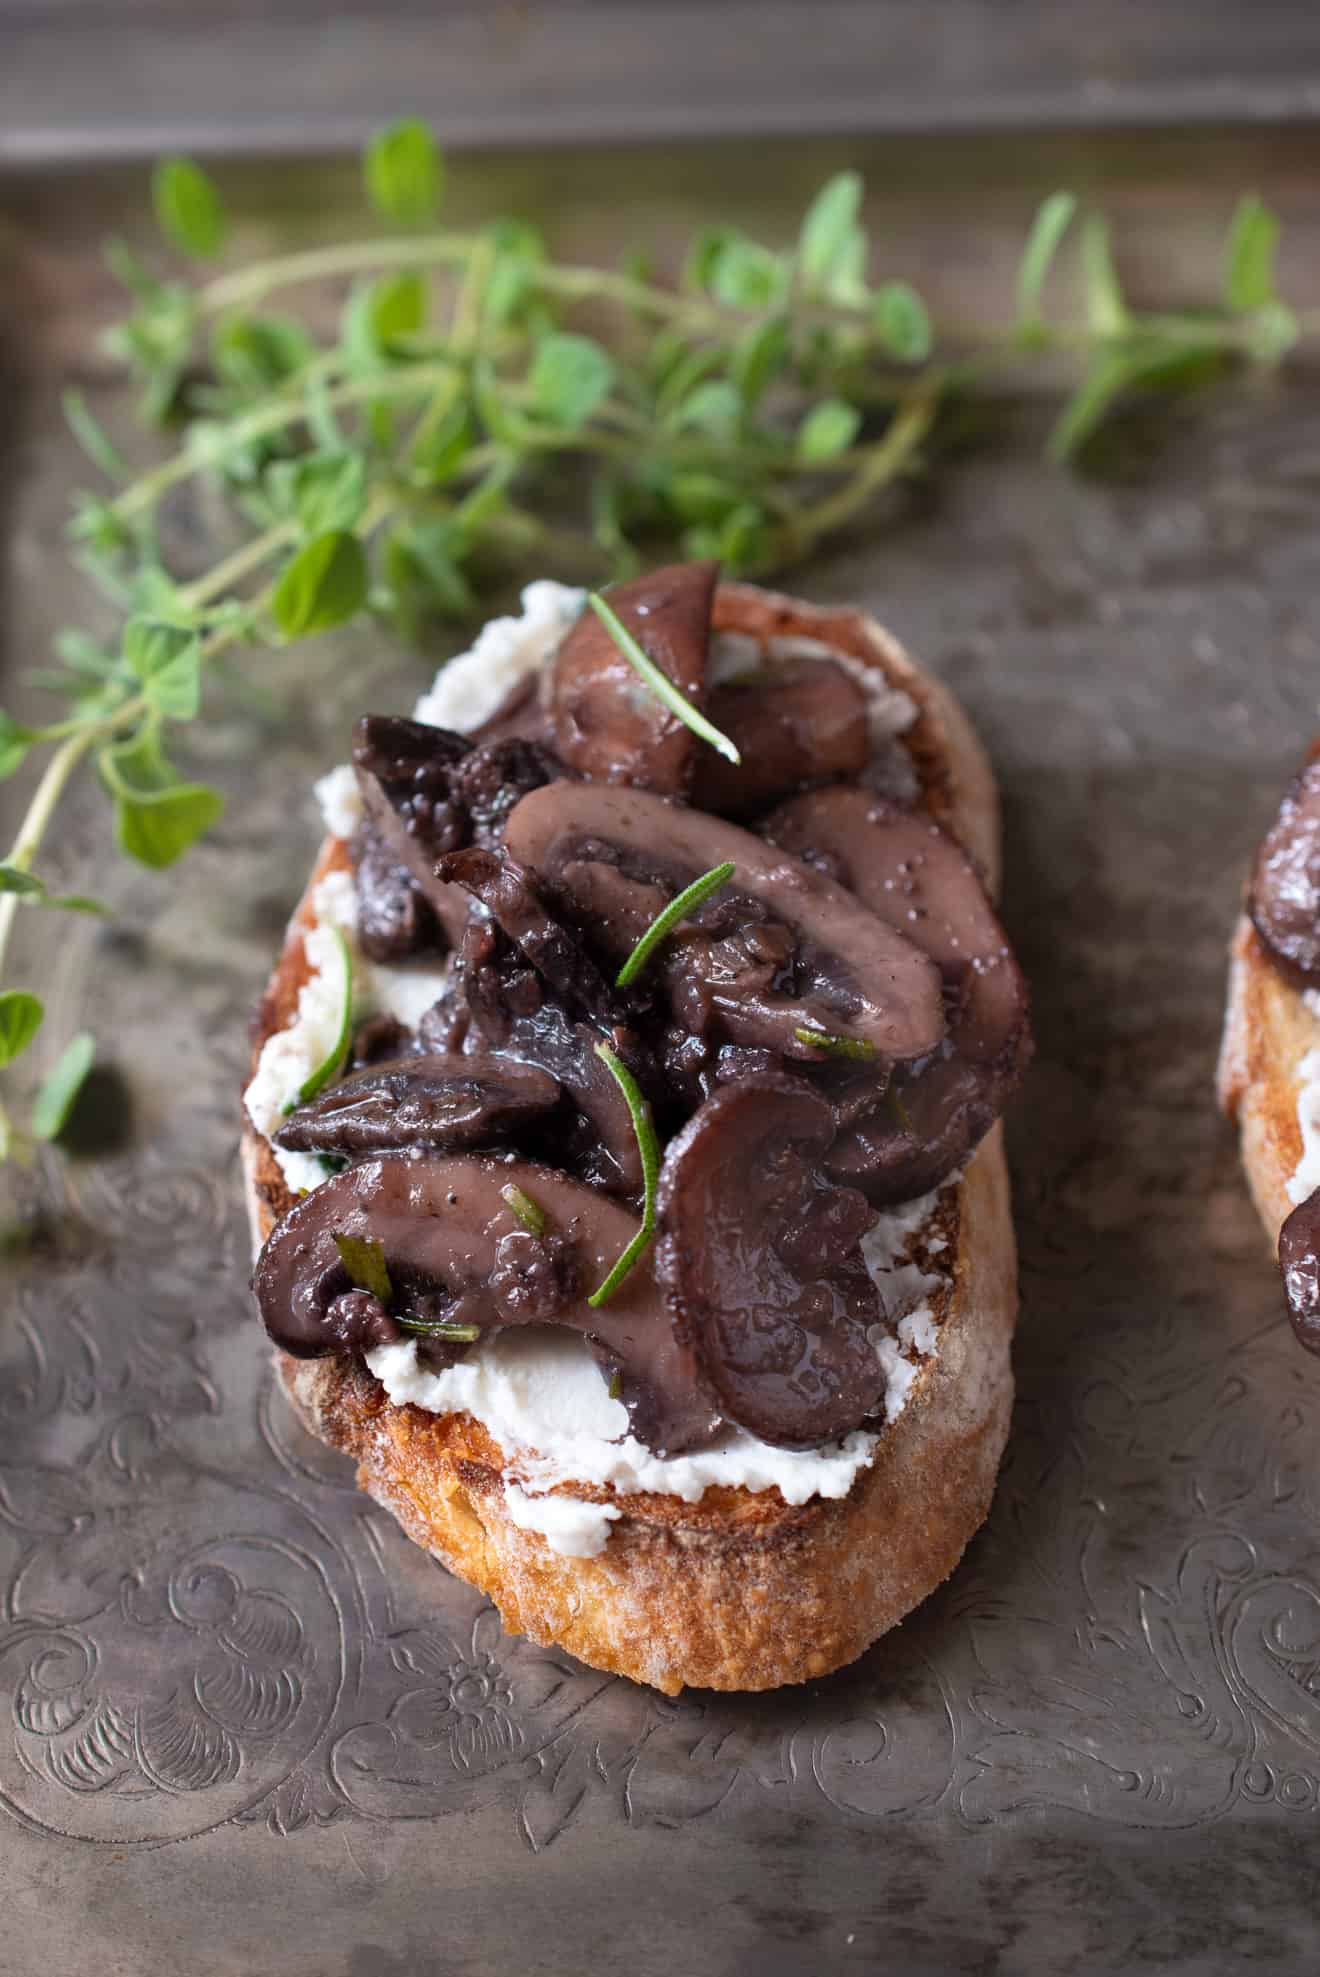 Sautéed mushrooms and rosemary with ricotta cheese on crusty bread